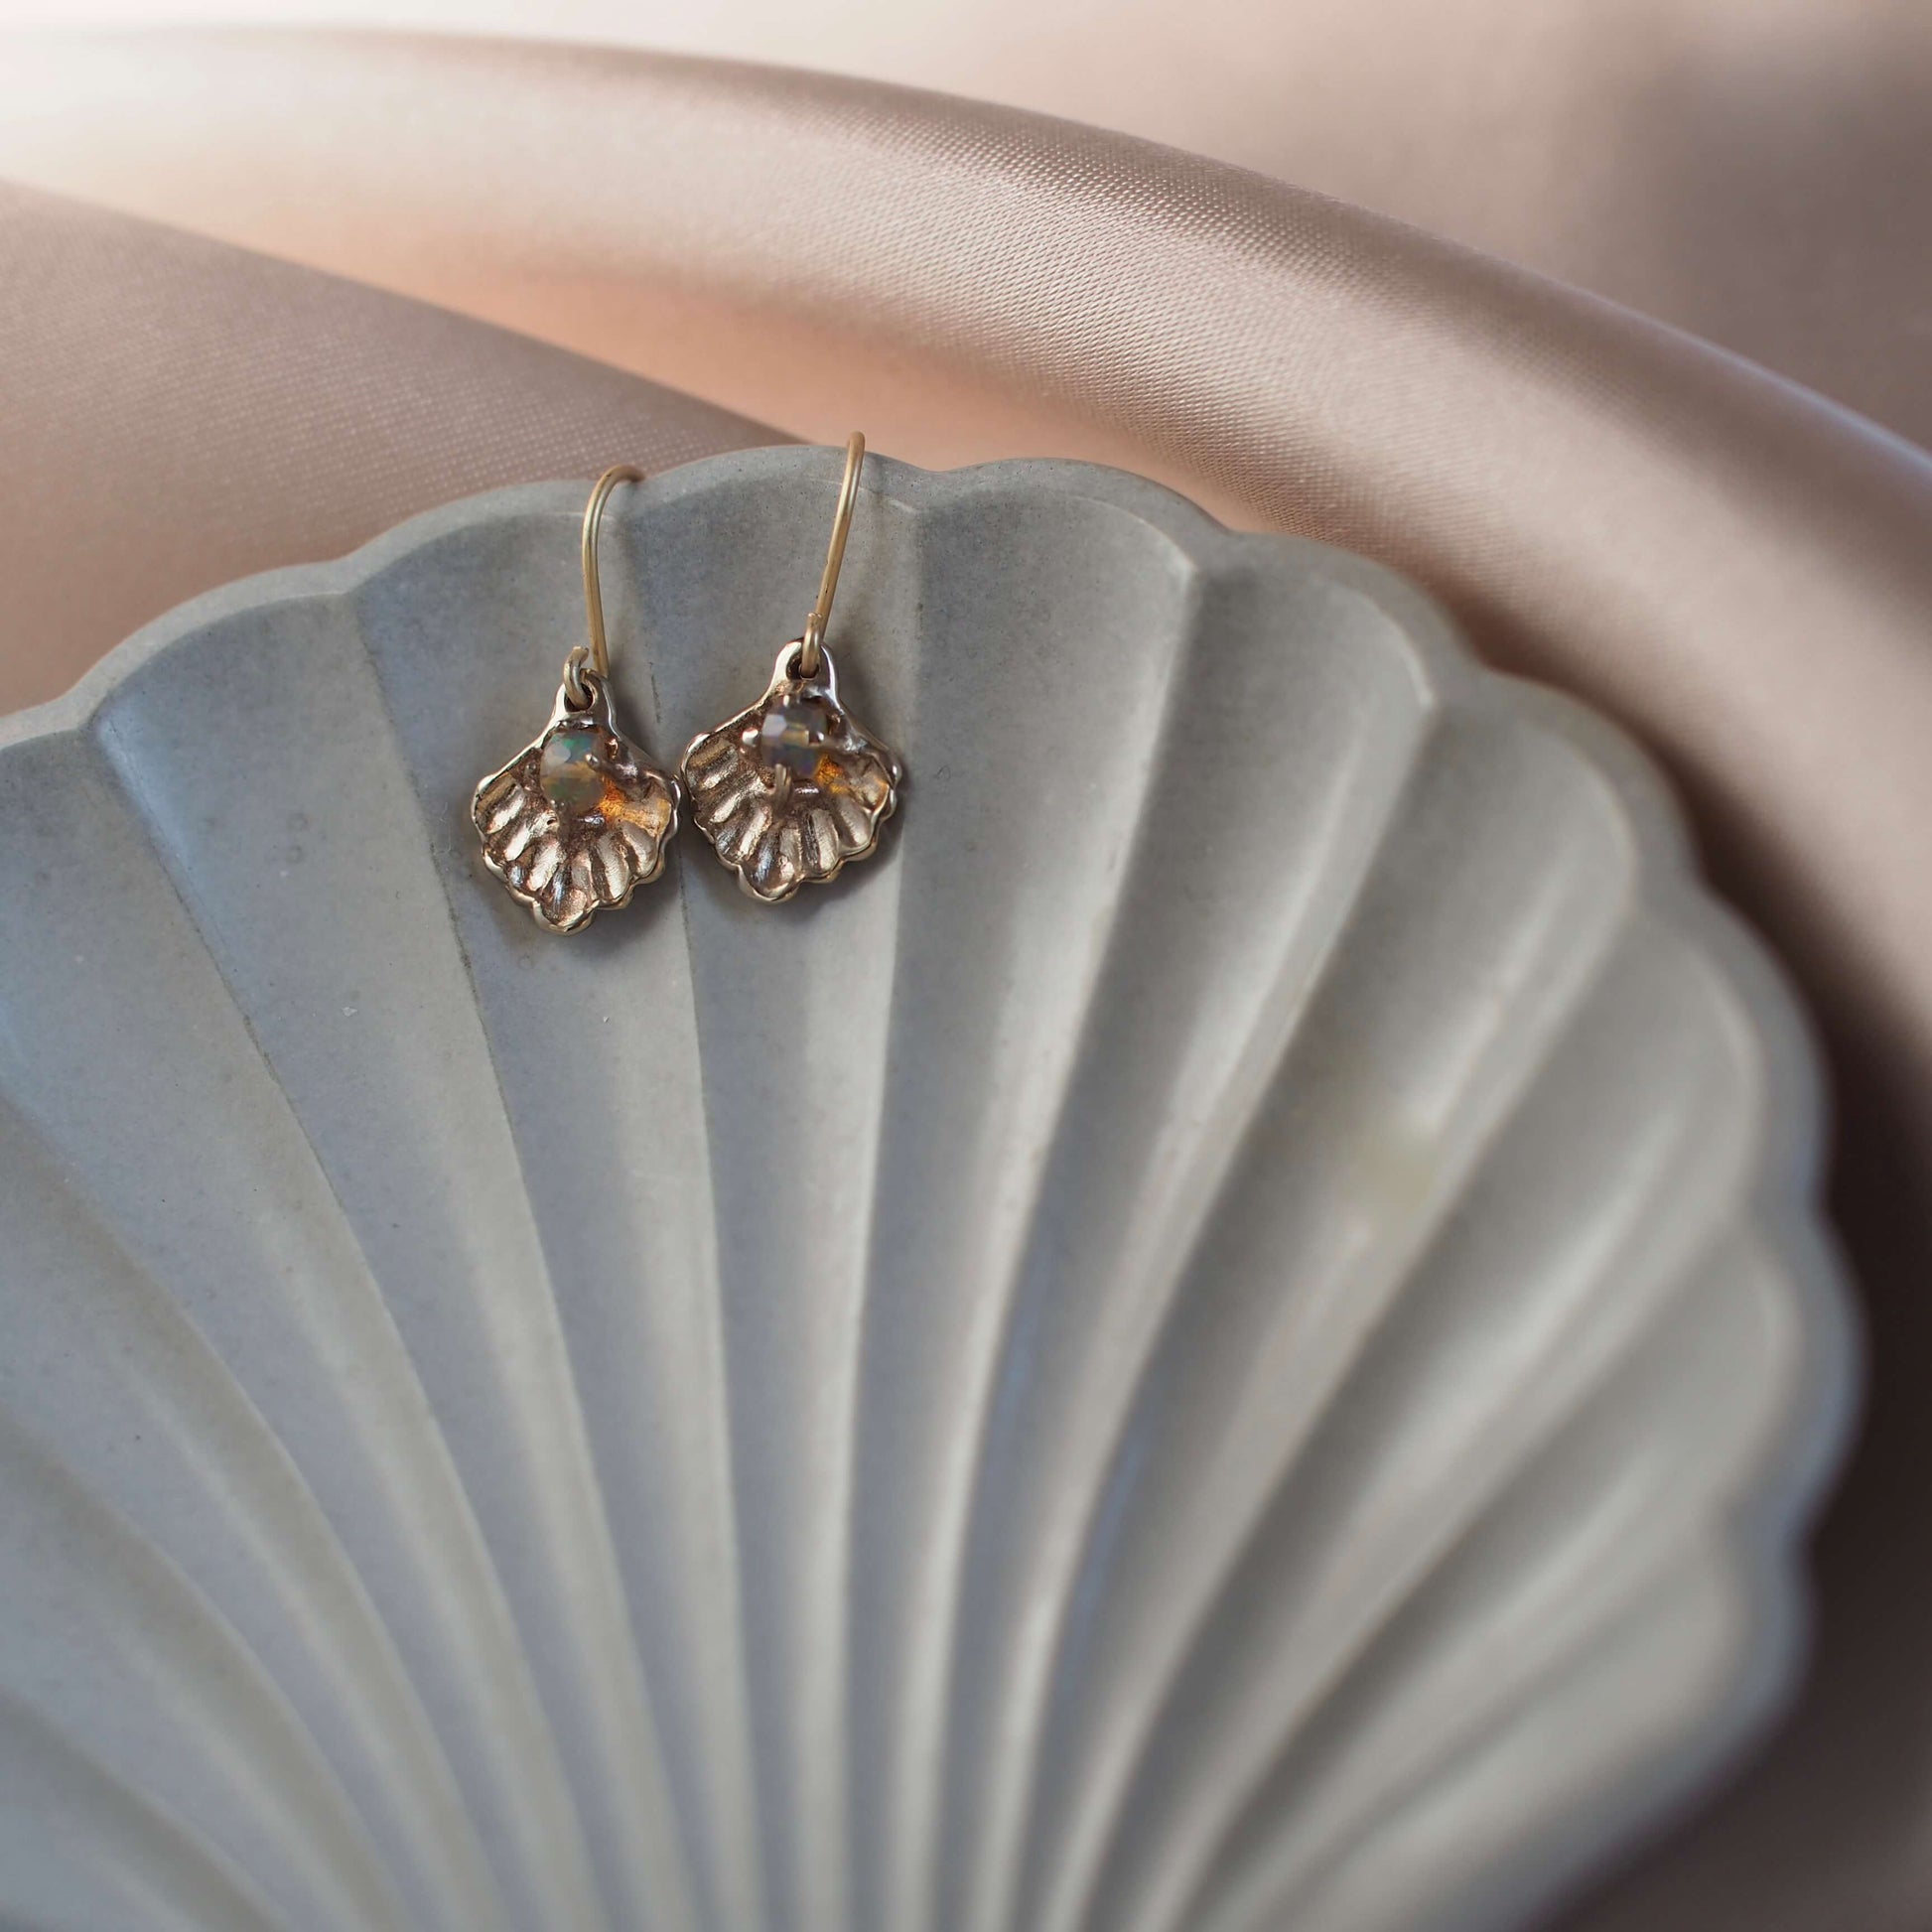 Oyster shell earrings containing a small opal "pearl", cast in gold tone bronze by Iron Oxide Designs set on a shell backdrop